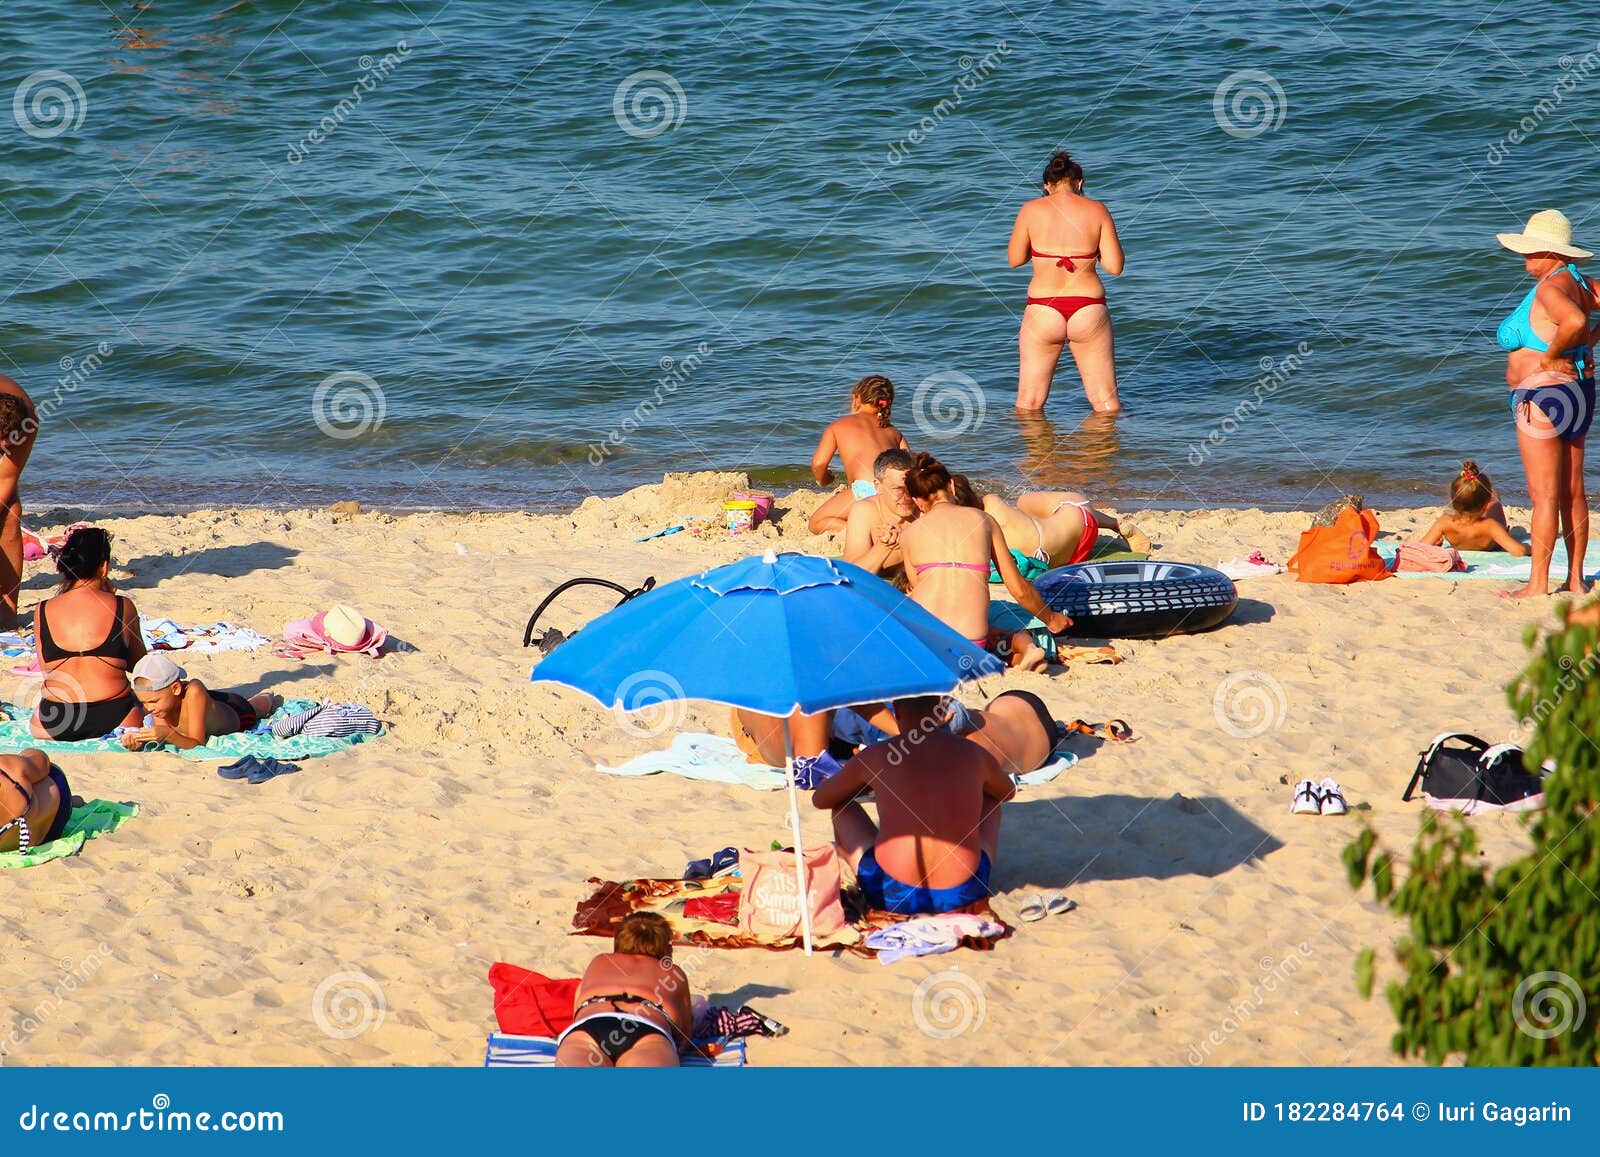 Odessa Ukraine People On The City Beach Editorial Stock Image Image Of Girls Relaxation